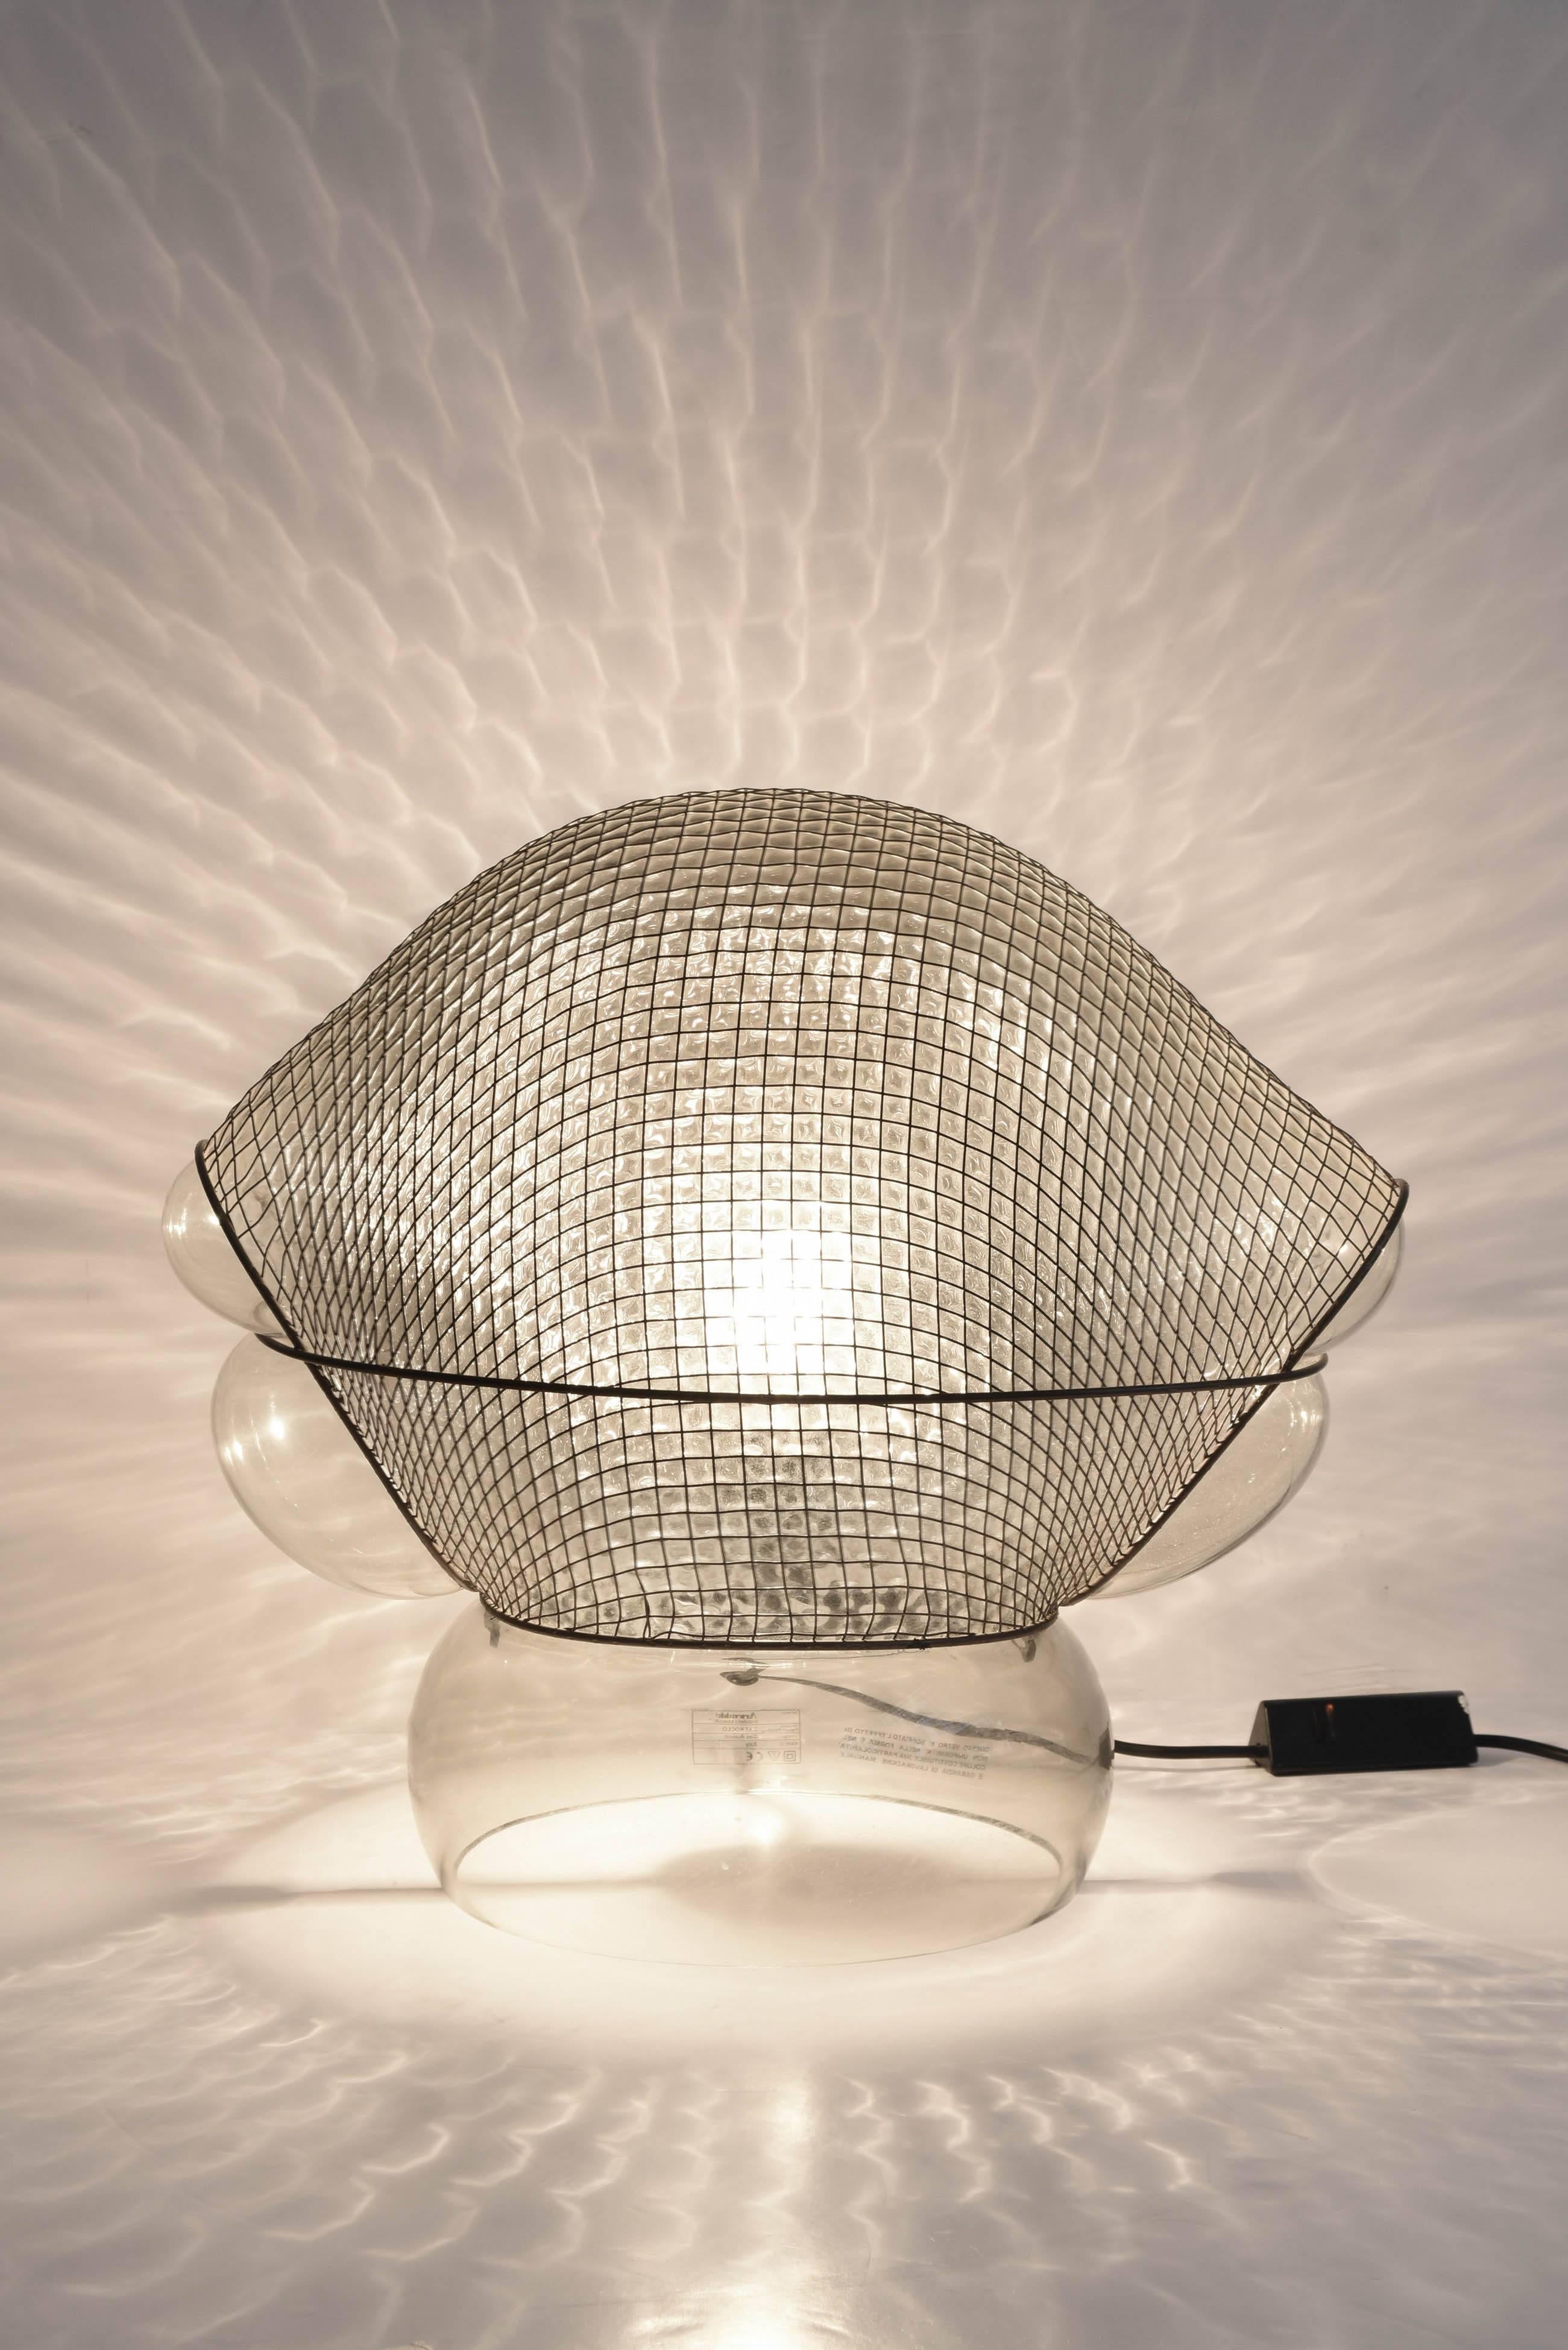 Table lamp by Gae Aulenti “Patroclo” produced by Artemide 1975. With dimmer. Body in transparent blown glass with armor in steel wires.Labeled: Artemide
modern classic 
PATROCLO
Gae Aulenti
Italy